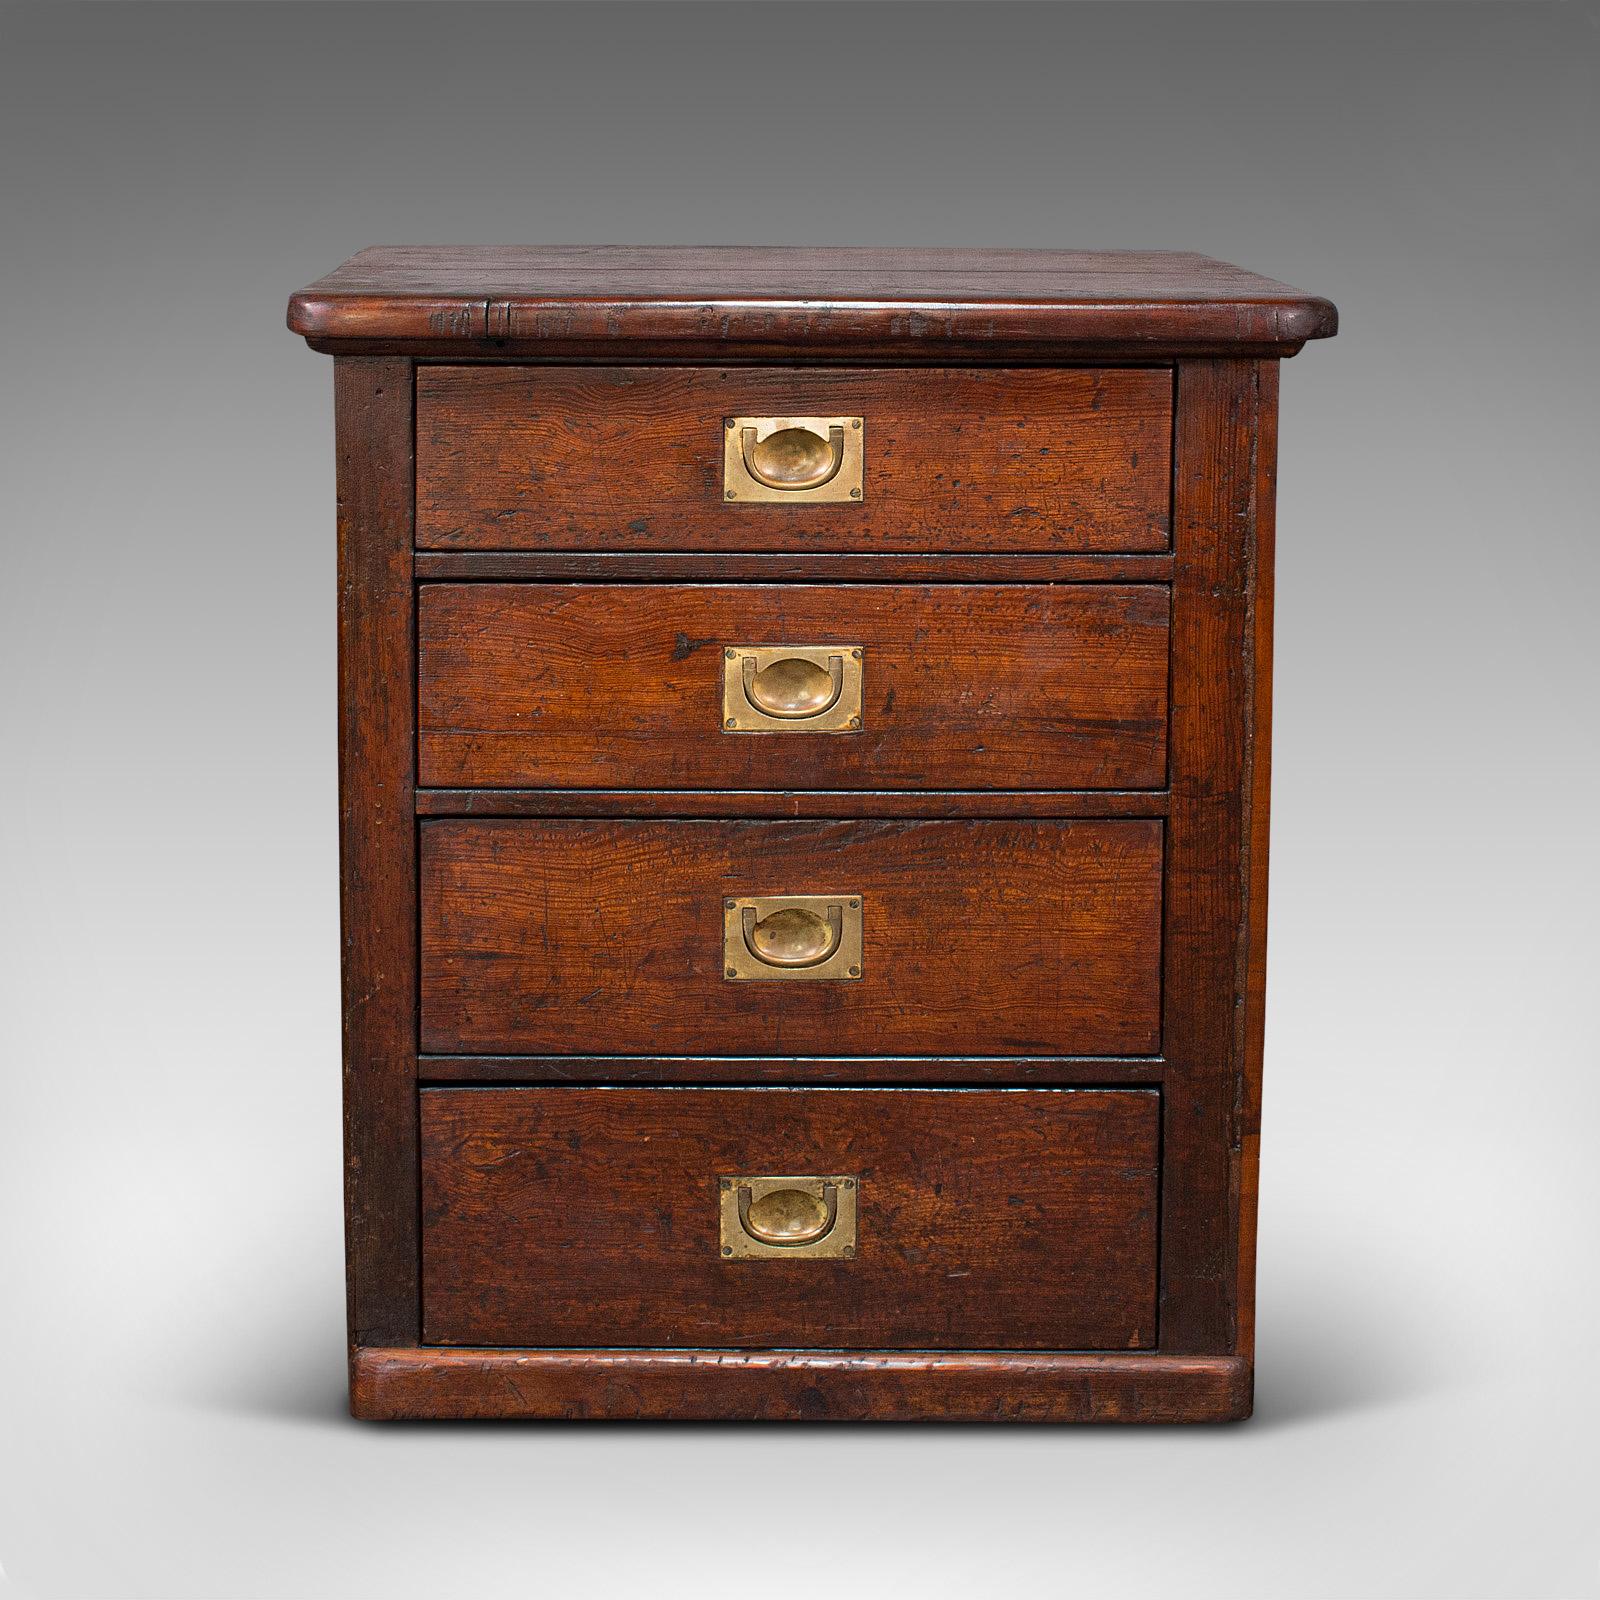 This is an antique Campaign chest of drawers. An English, pitch pine shop retail cabinet, dating to the Victorian period, circa 1870.

Of generous proportion and Victorian Campaign appeal
Displaying a desirable aged patina - some gentle wear